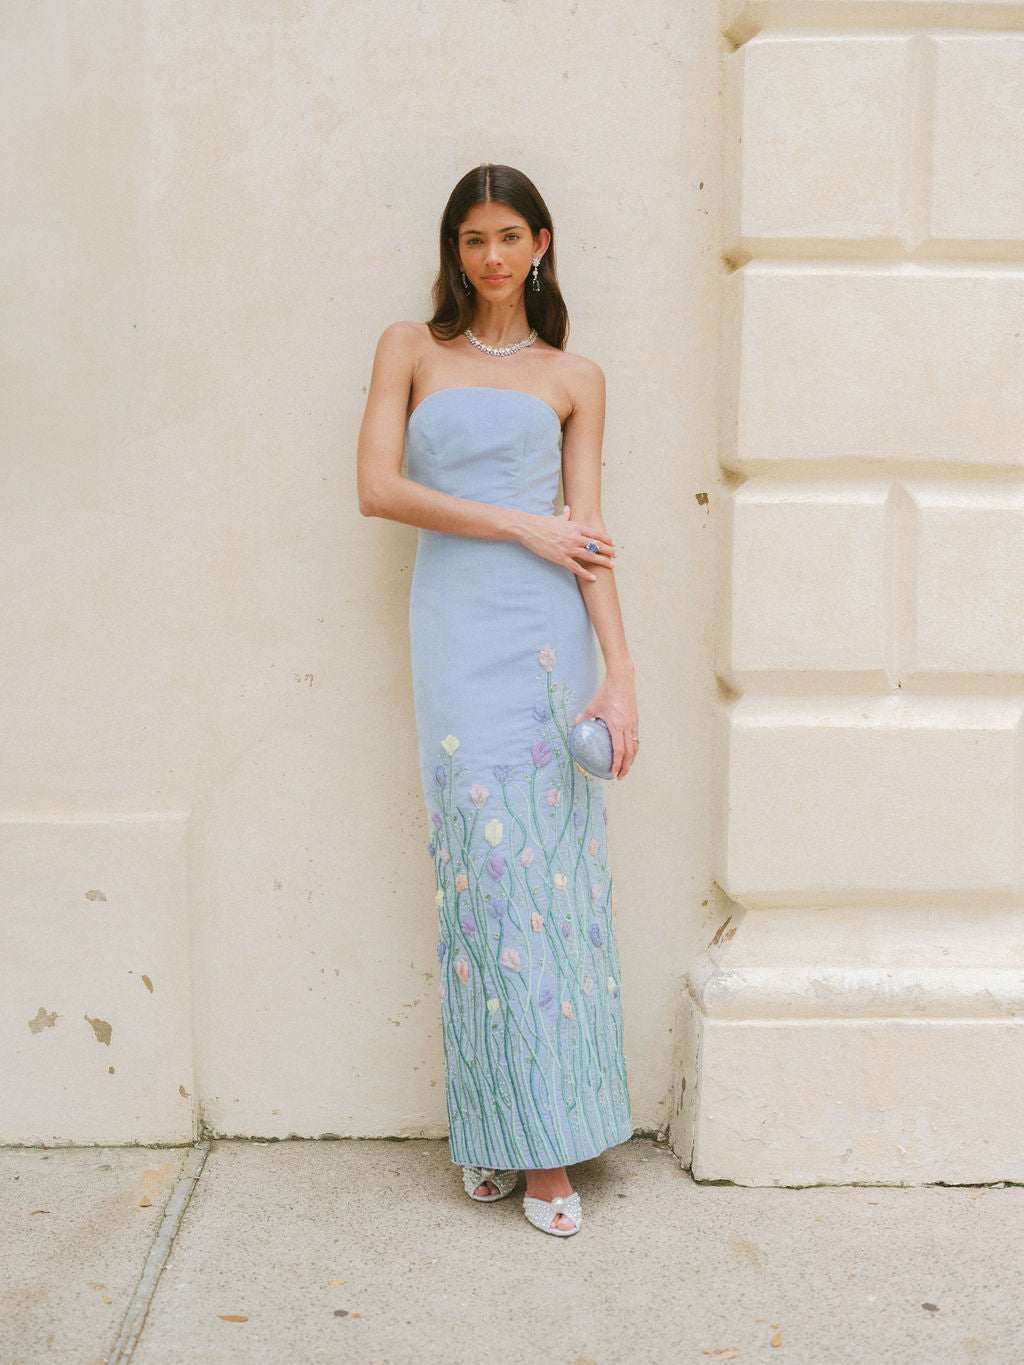 OTM Exclusive: The Micaela Gown in Blue